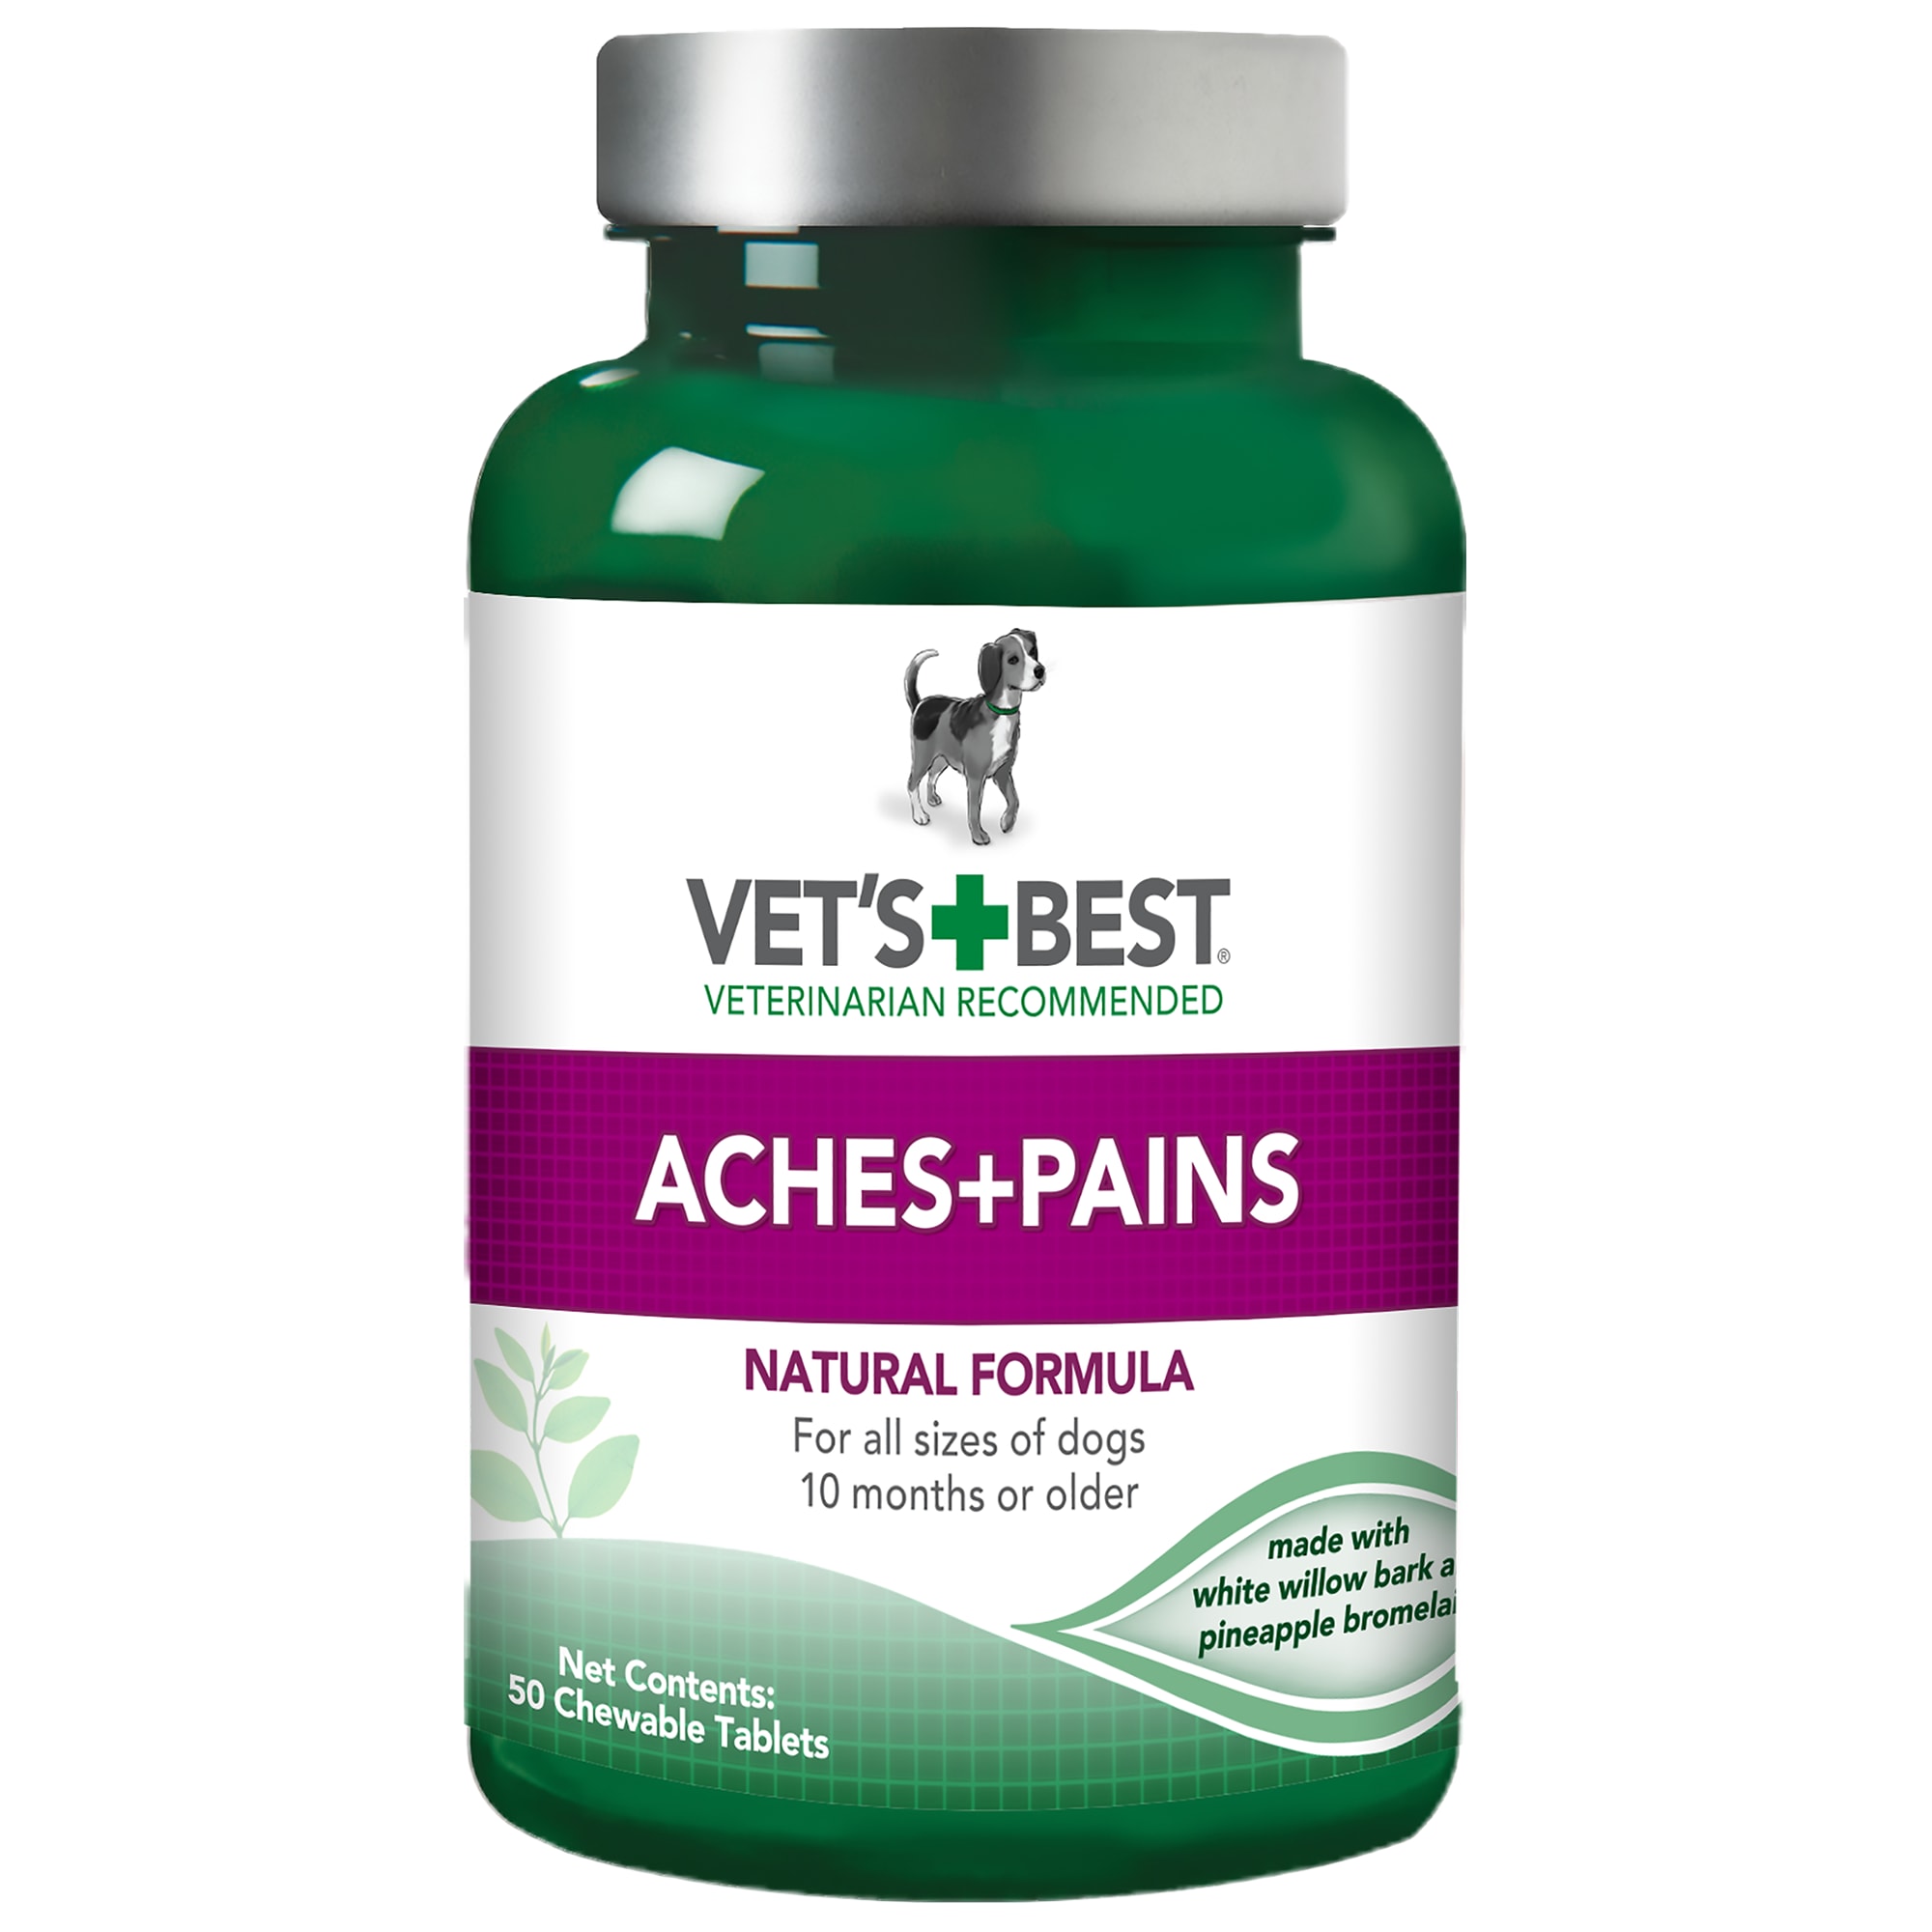 Vet's Best Aches \u0026 Pains for Dogs | Petco